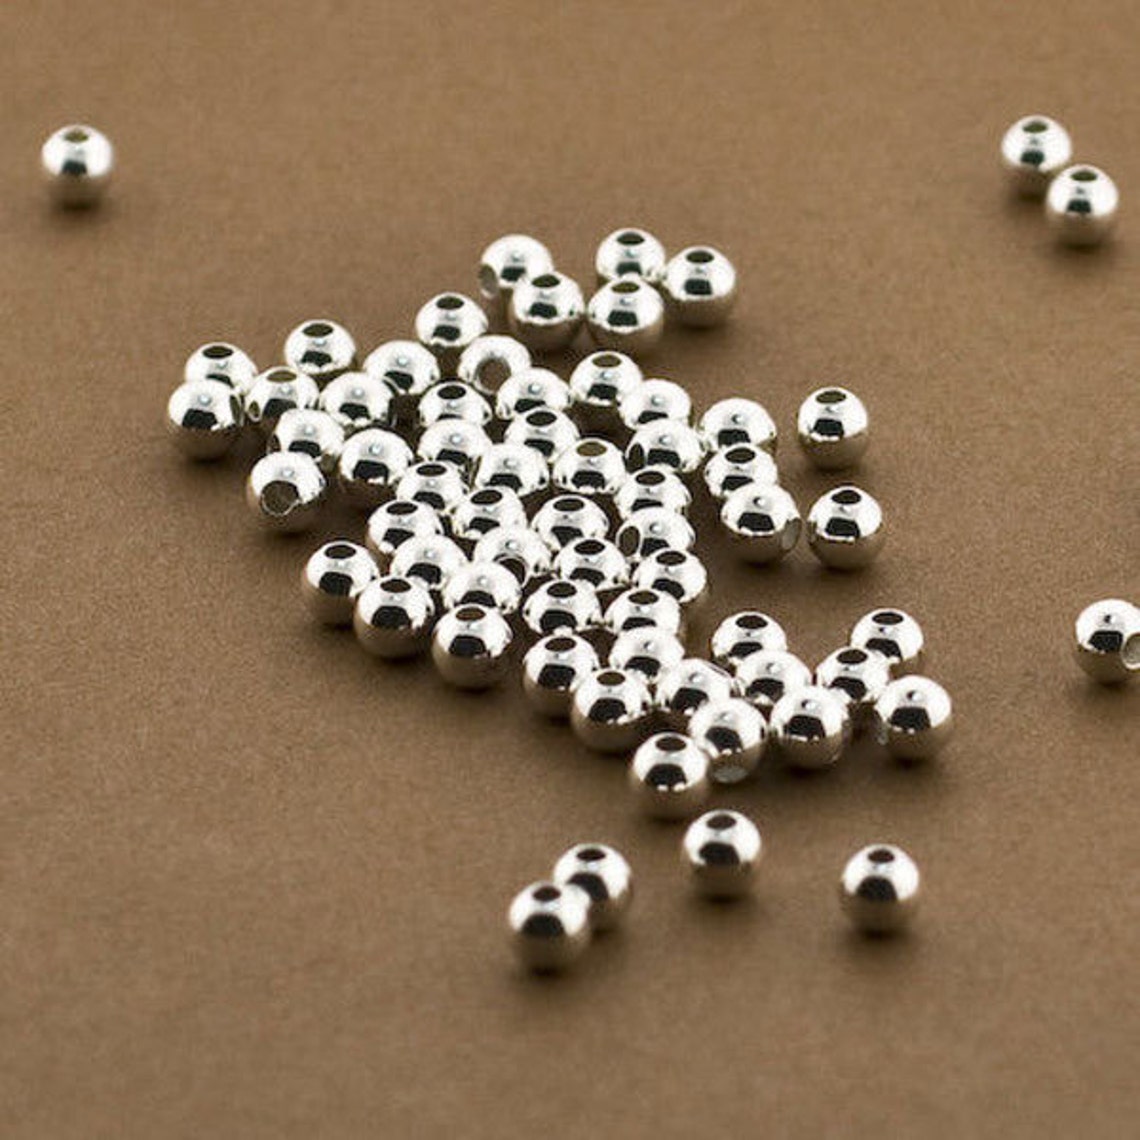 200 Sterling Silver 4mm Round Seamless Smooth Beads 4mm - Etsy